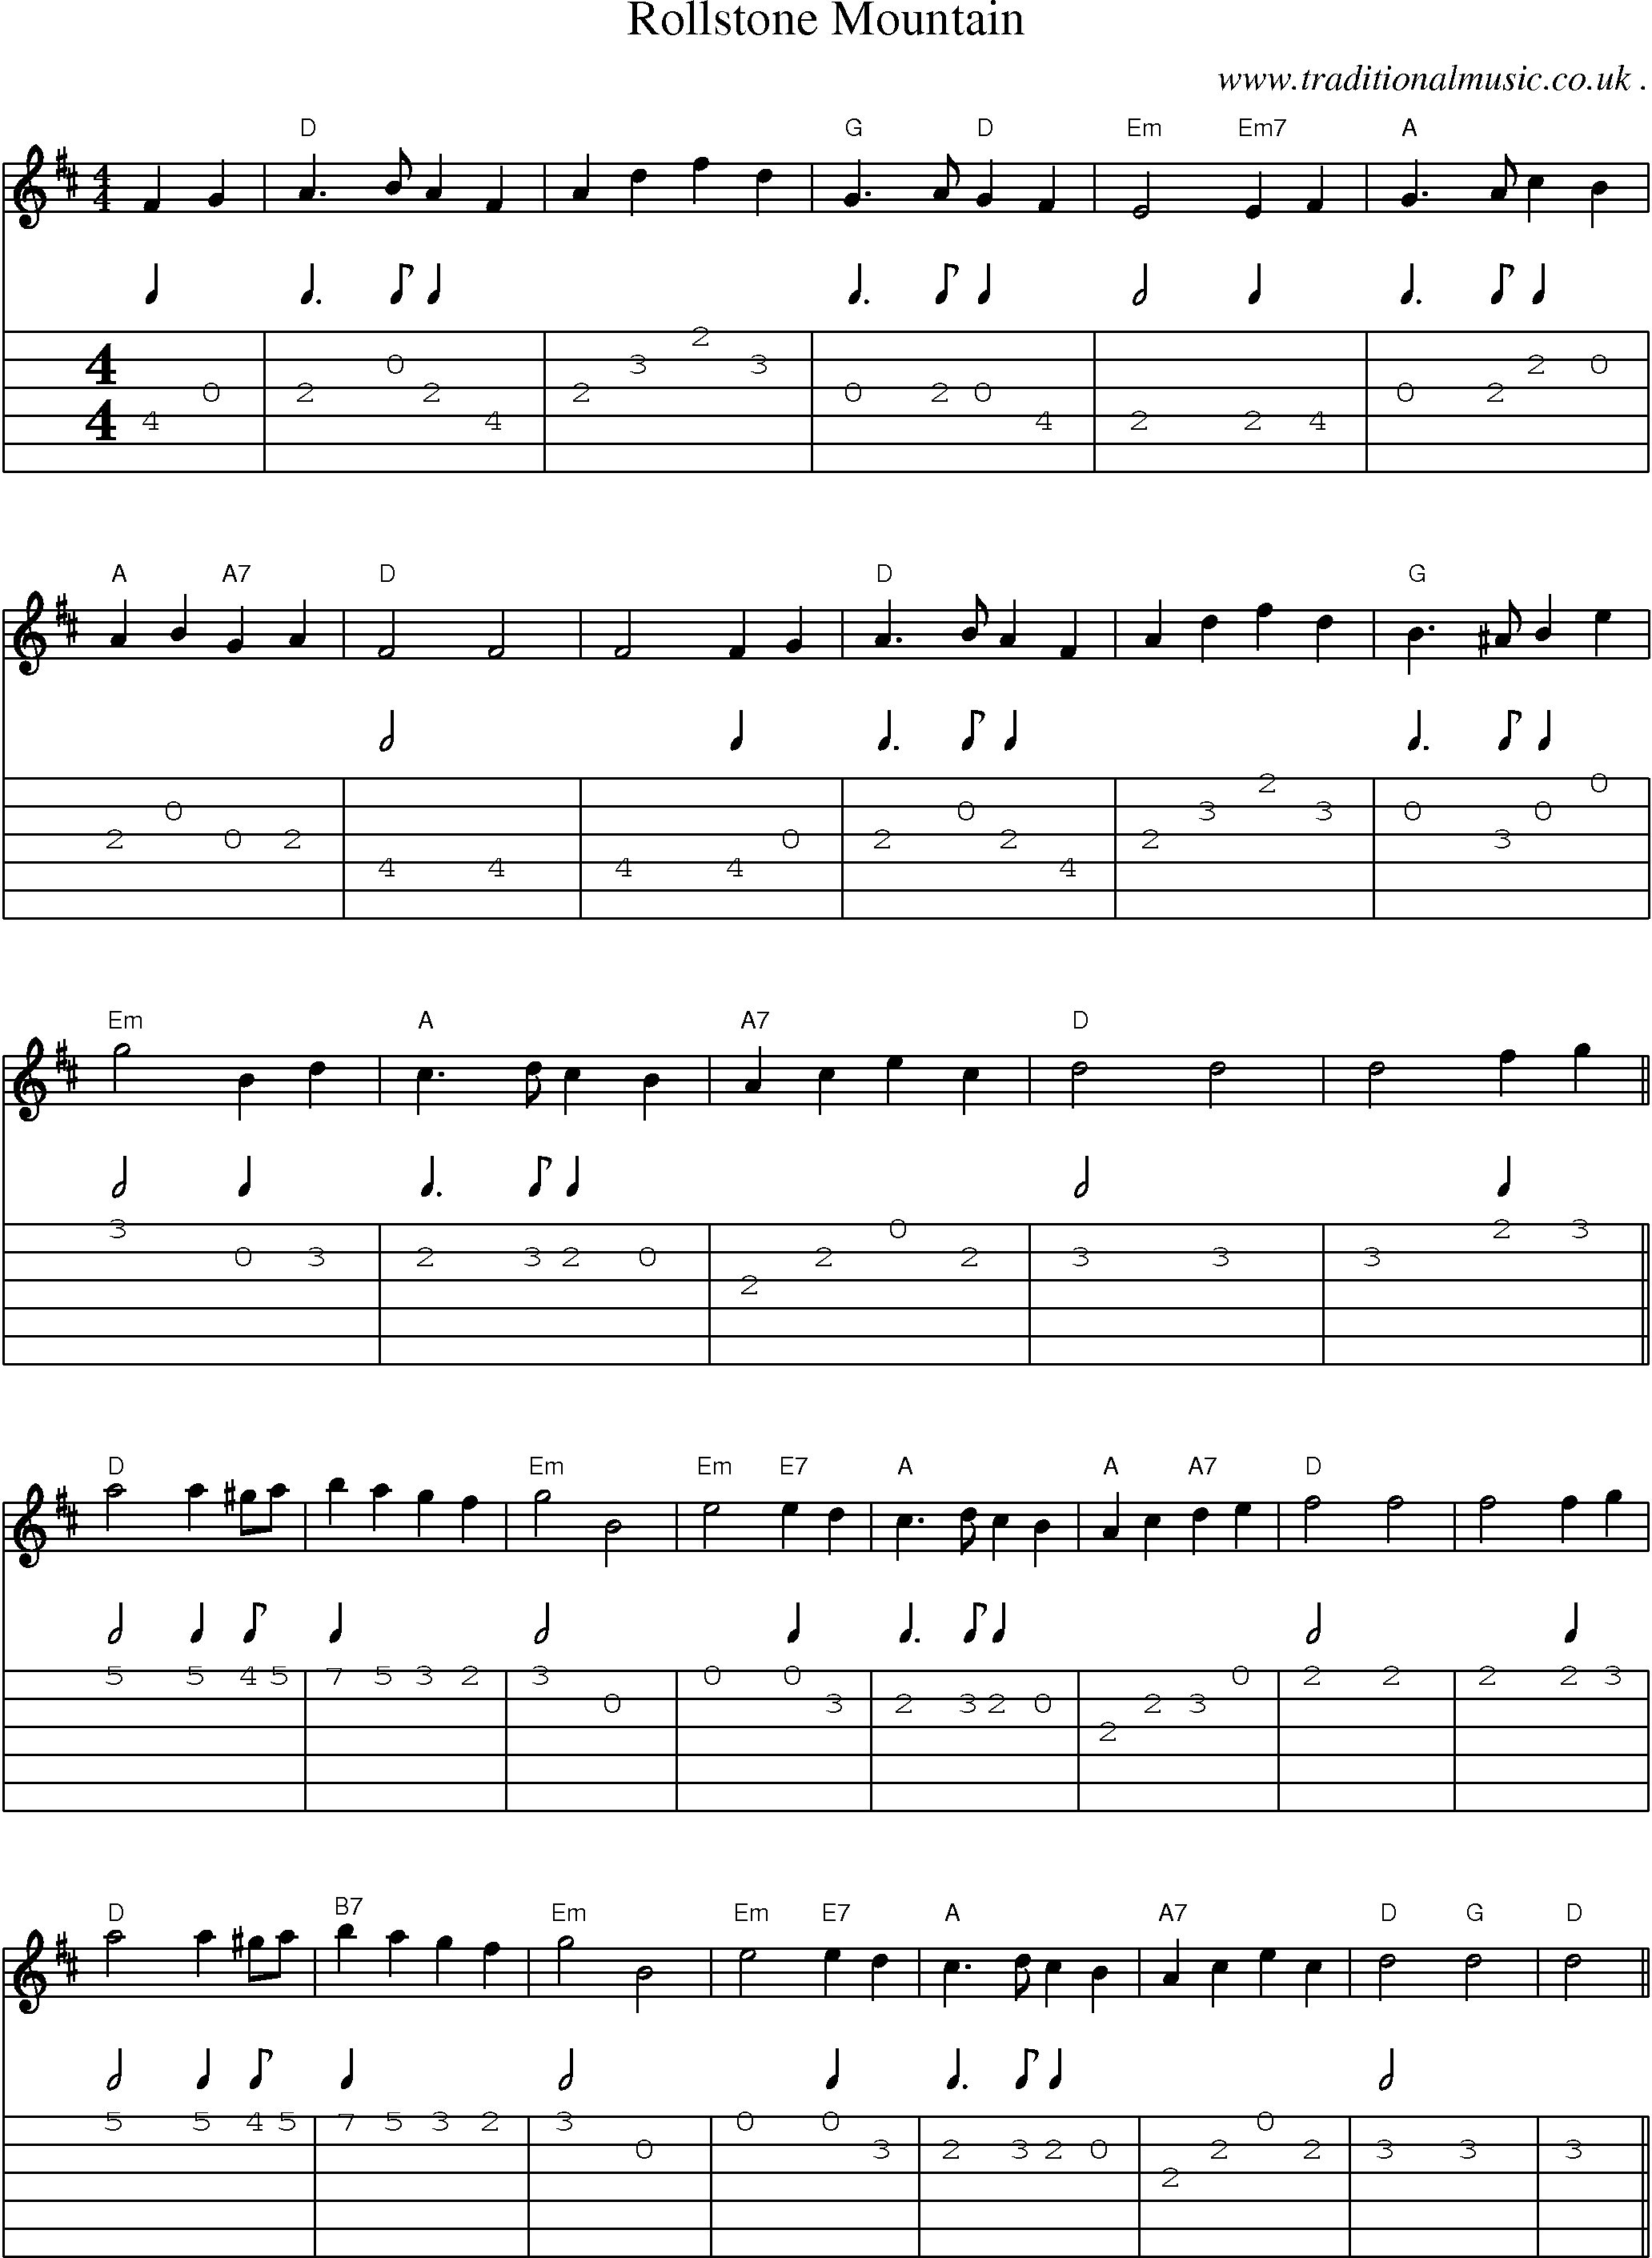 Sheet-Music and Guitar Tabs for Rollstone Mountain